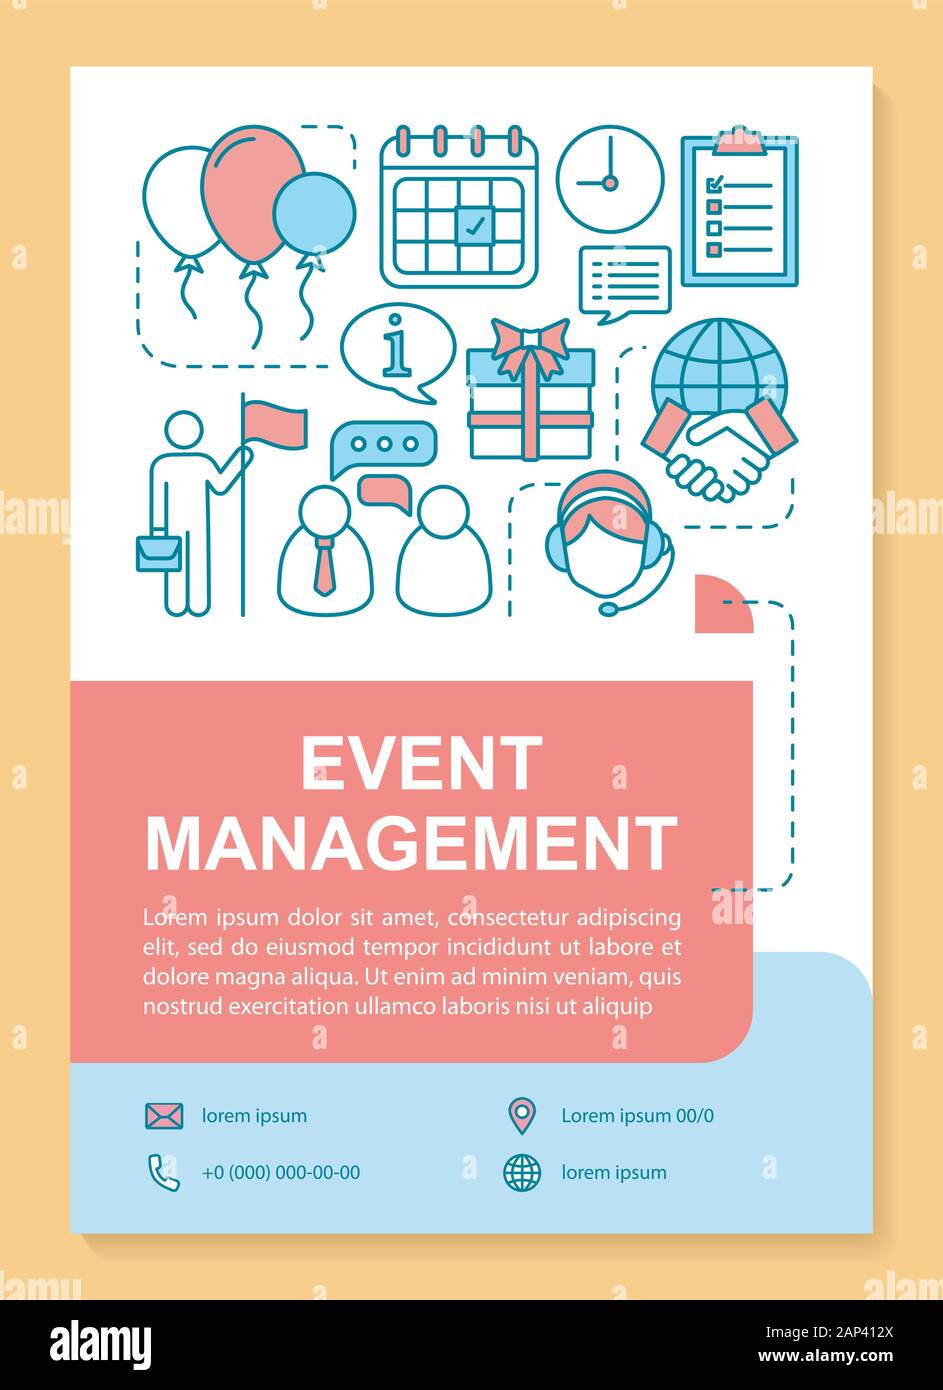 event-management-poster-template-layout-corporate-party-planning-holiday-celebration-banner-booklet-leaflet-print-design-with-linear-icons-vecto-2AP412X.jpg